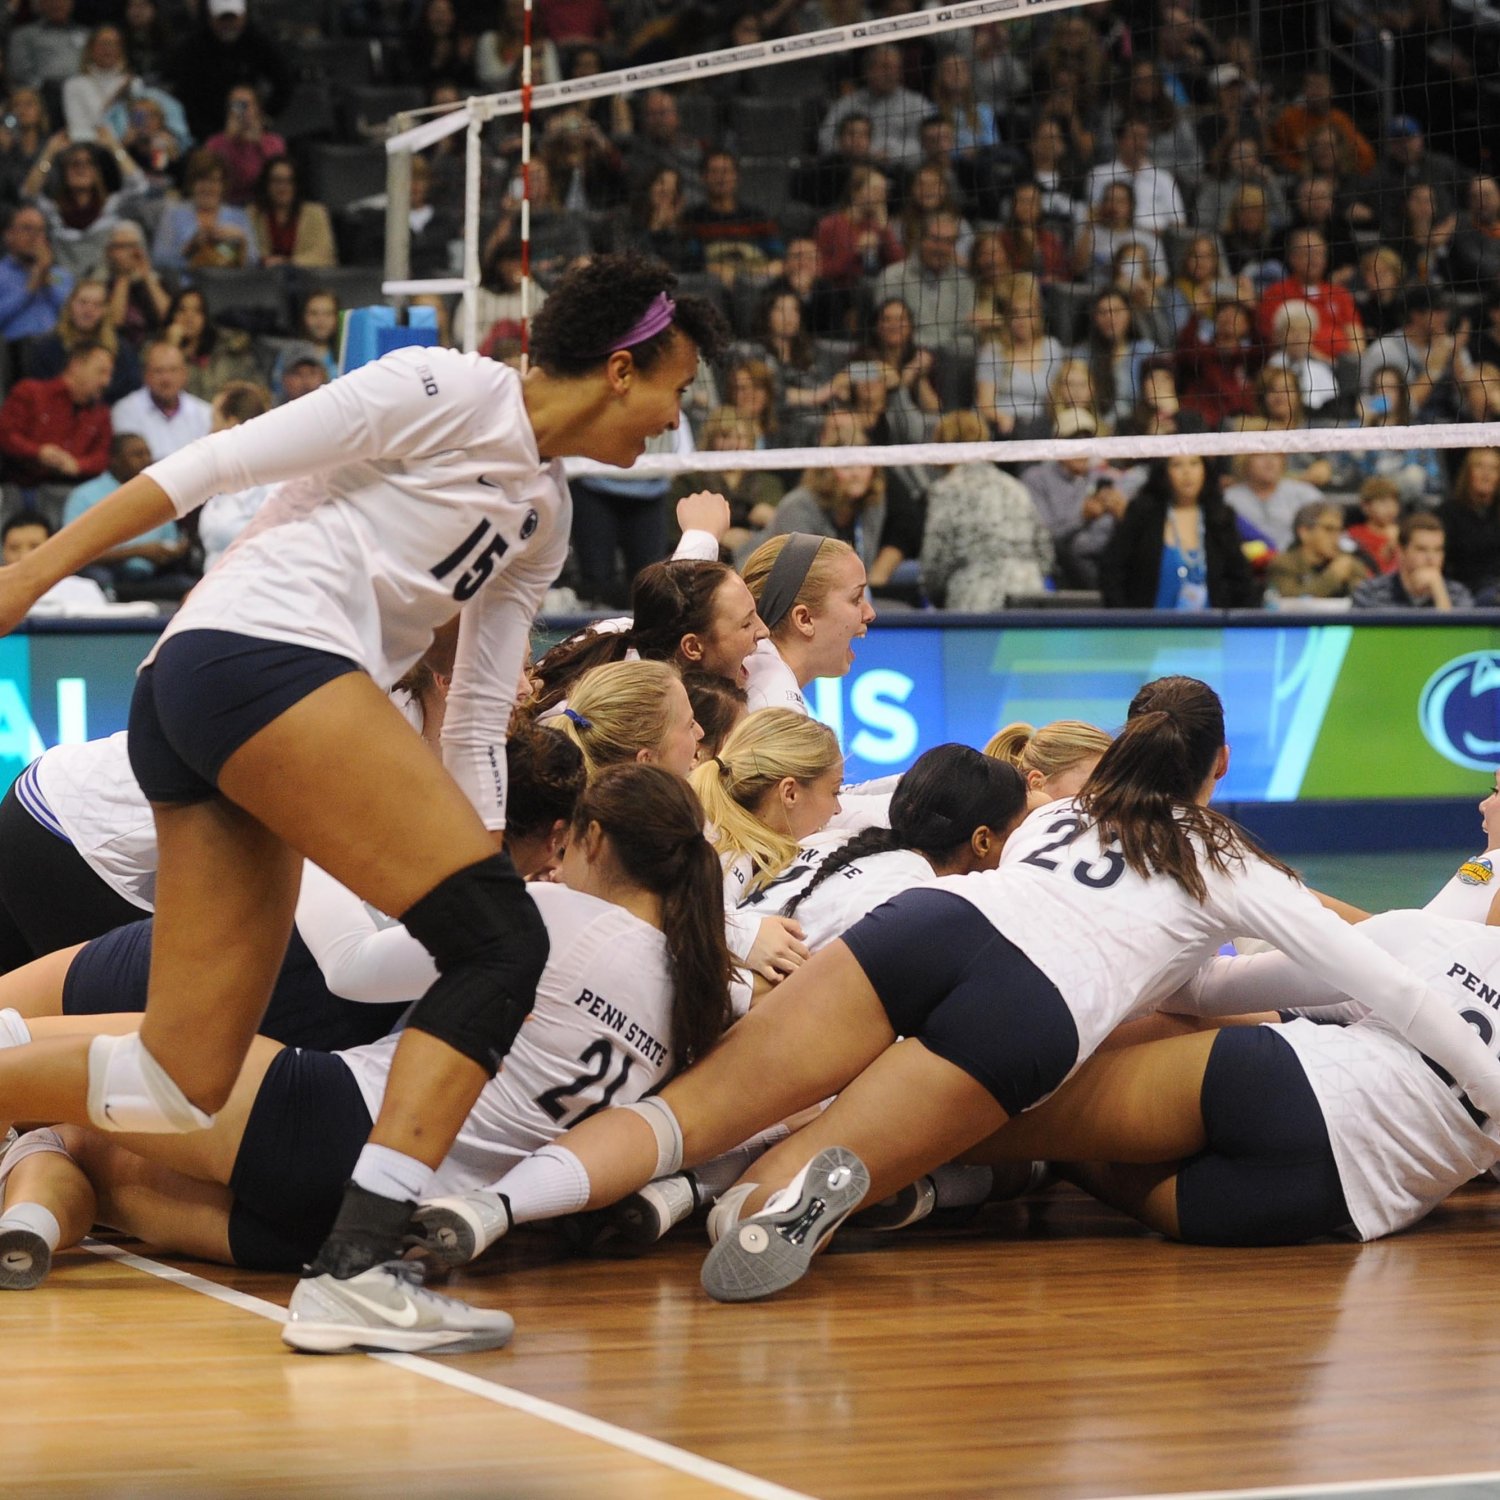 NCAA Women's Volleyball Championship 2014 Score and Twitter Reaction